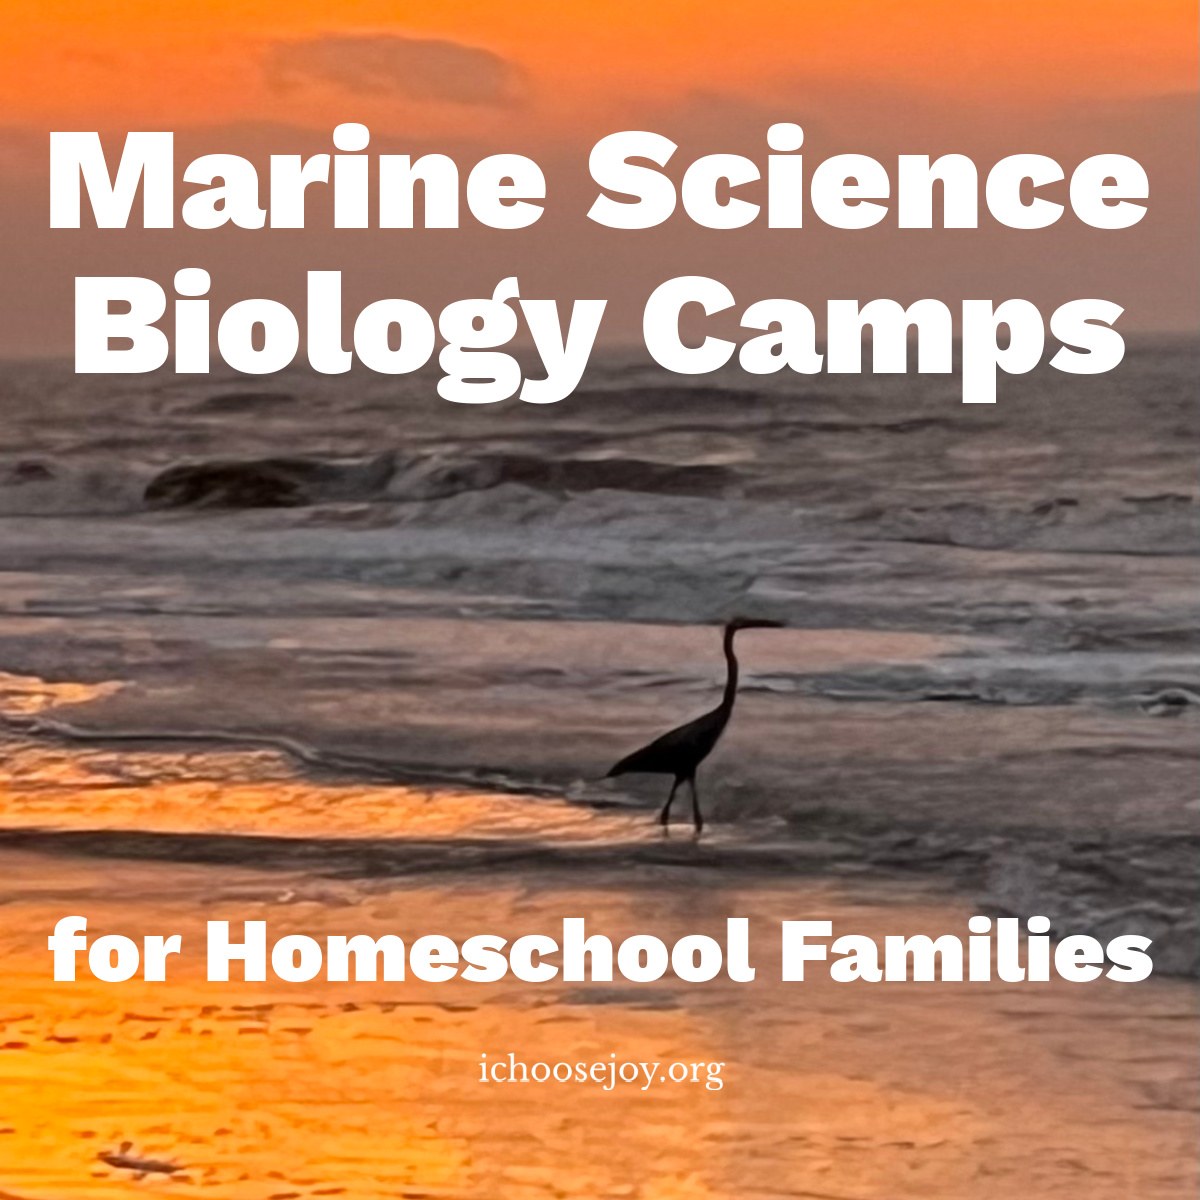 Marine Science Biology Camps for Homeschool Families